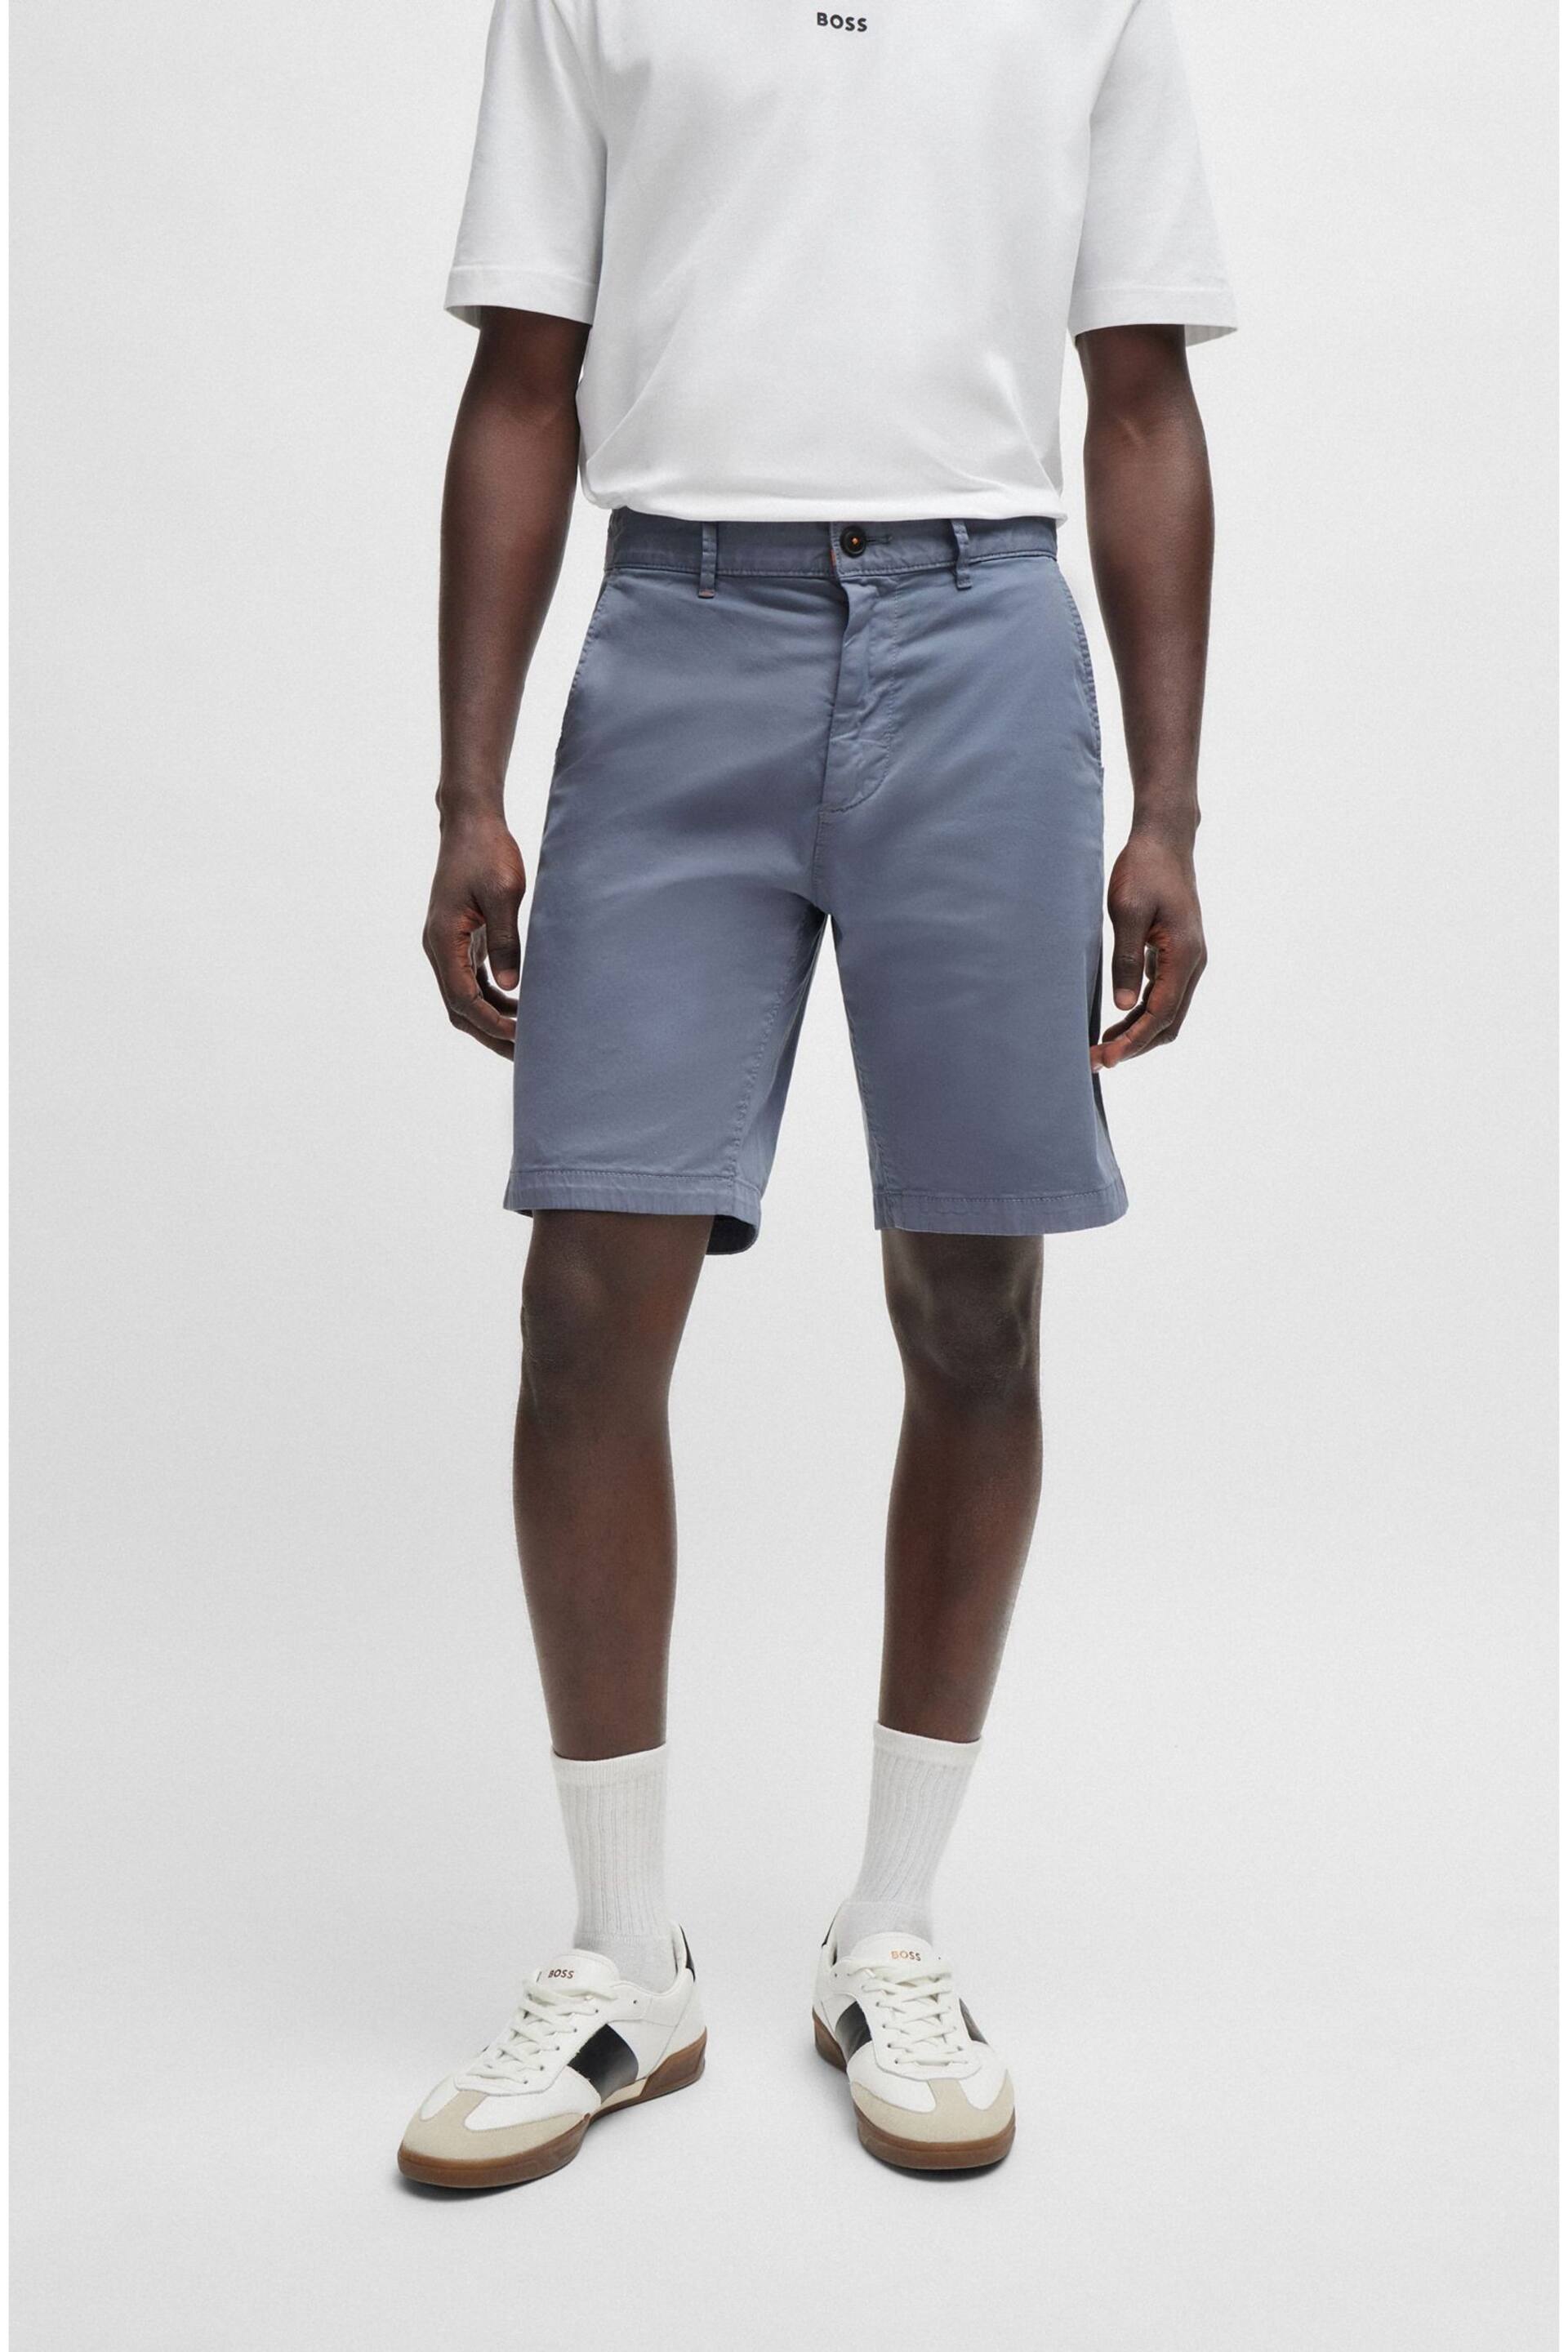 BOSS Mid Blue Slim Fit Stretch Cotton Chino Shorts - Image 1 of 5